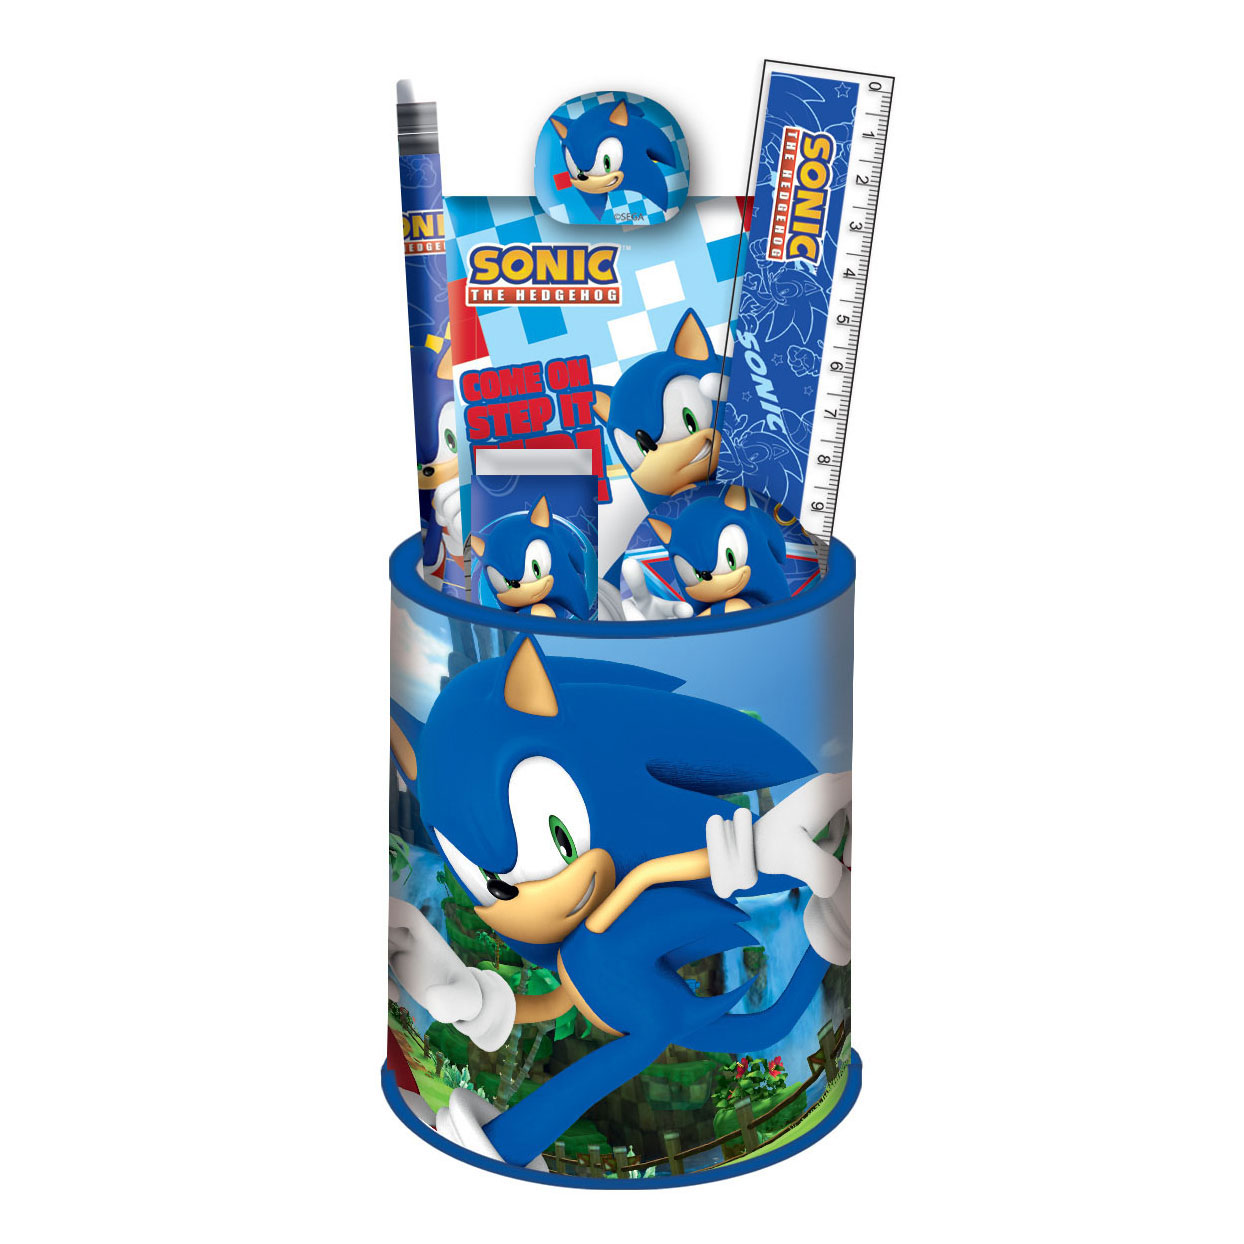 Sonic the Hedgehog 2 Stickers 100/Roll